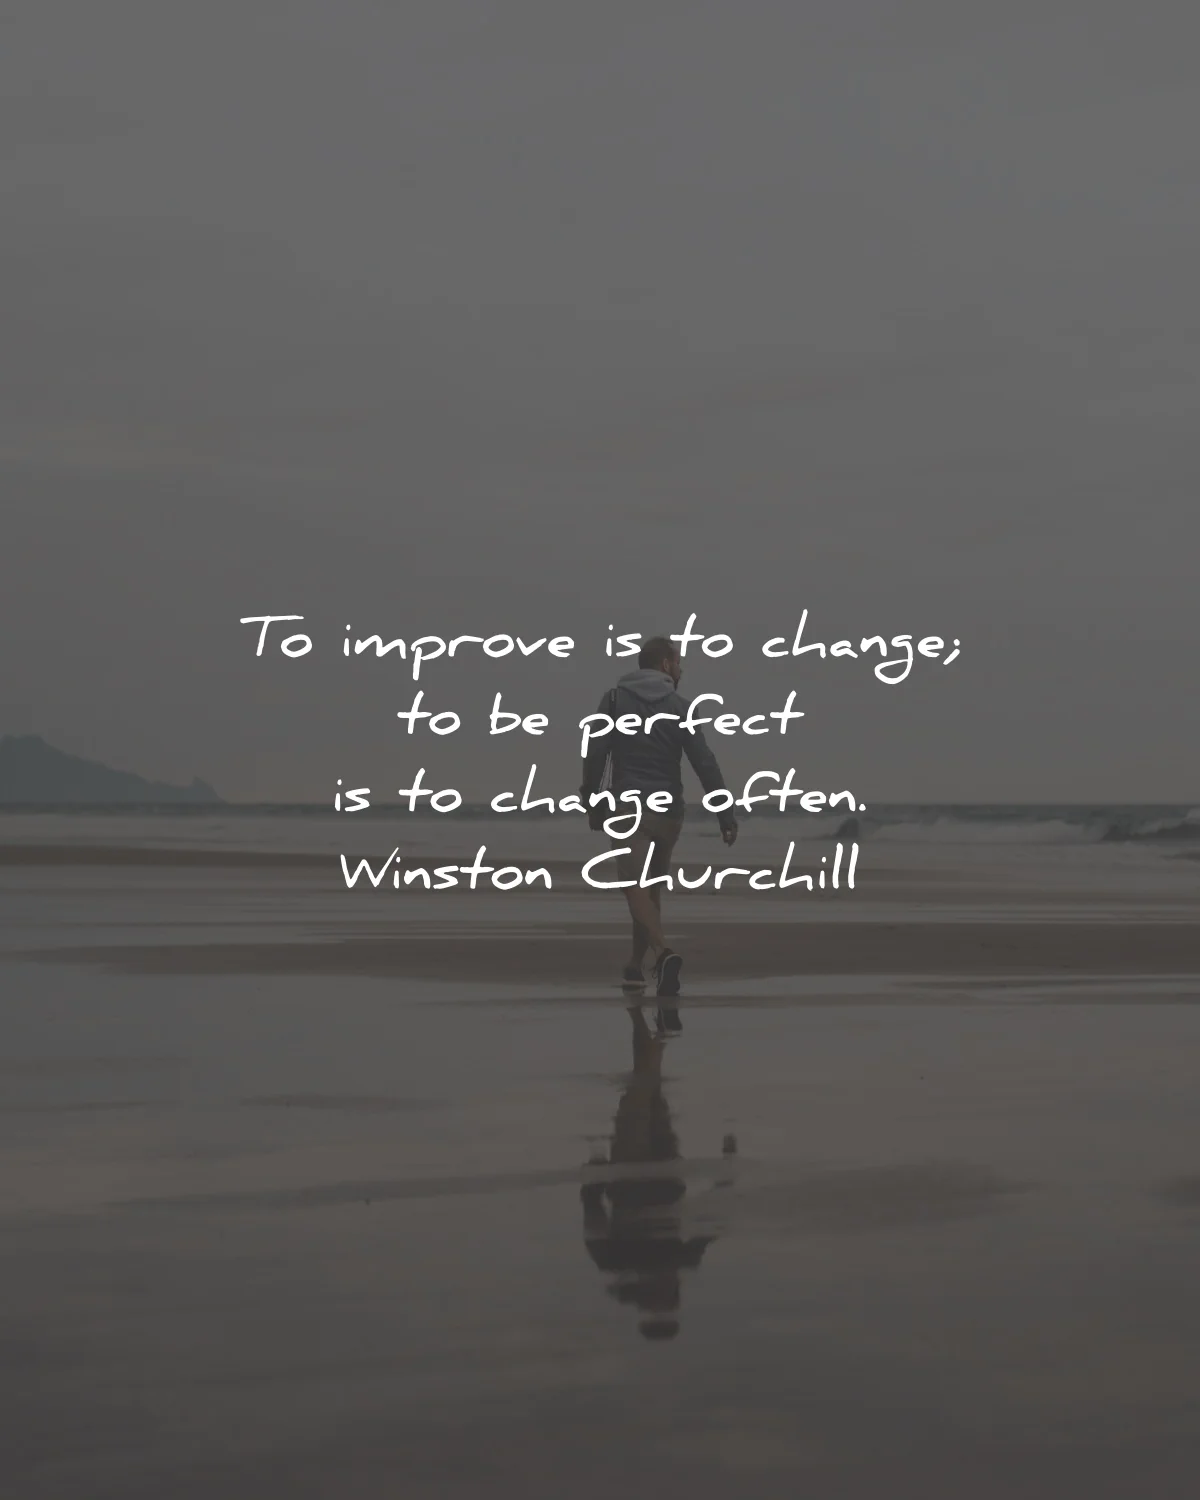 quotes about change growth improve perfect often winston churchill wisdom